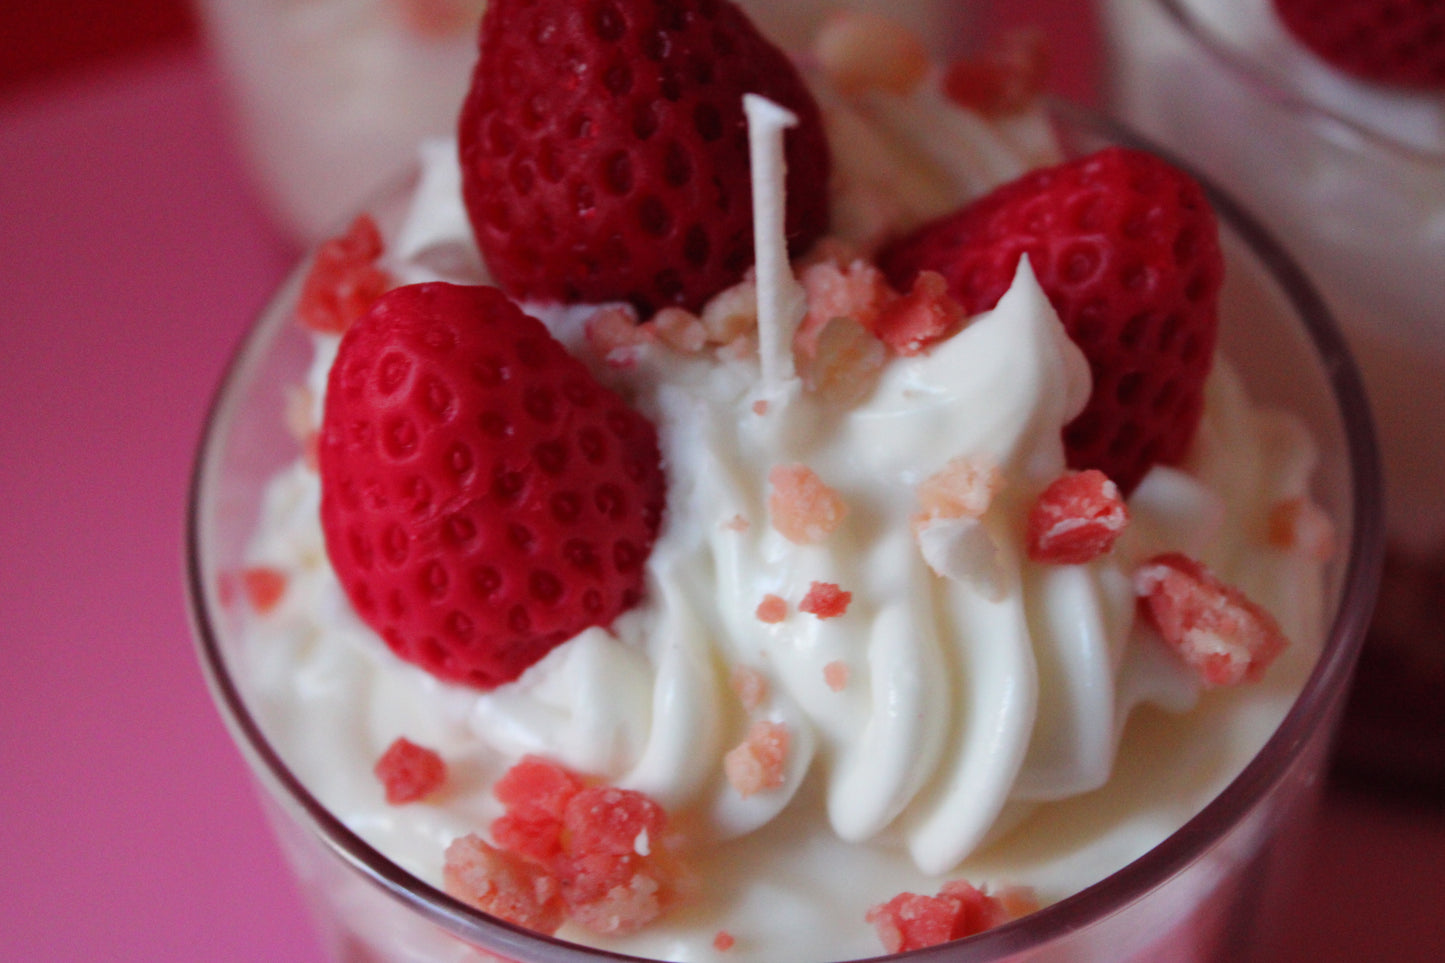 Strawberries and Whipped Cream Parfait